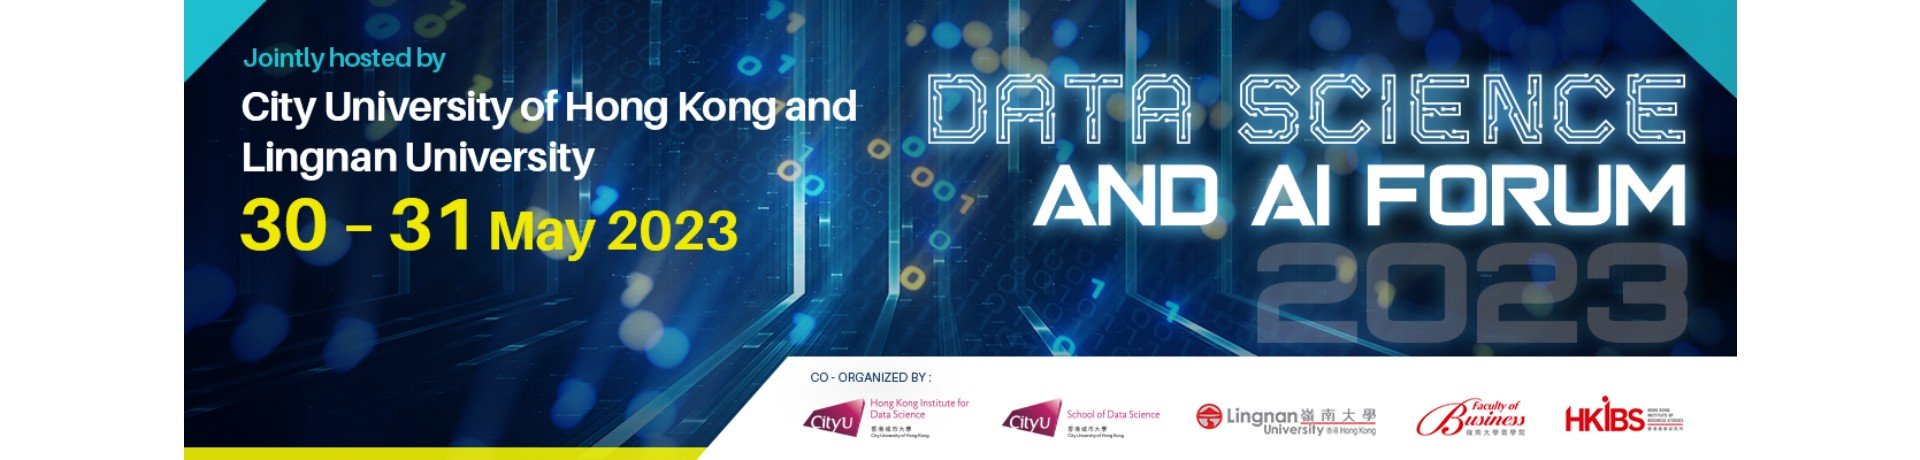 Data Science and AI Forum 2023